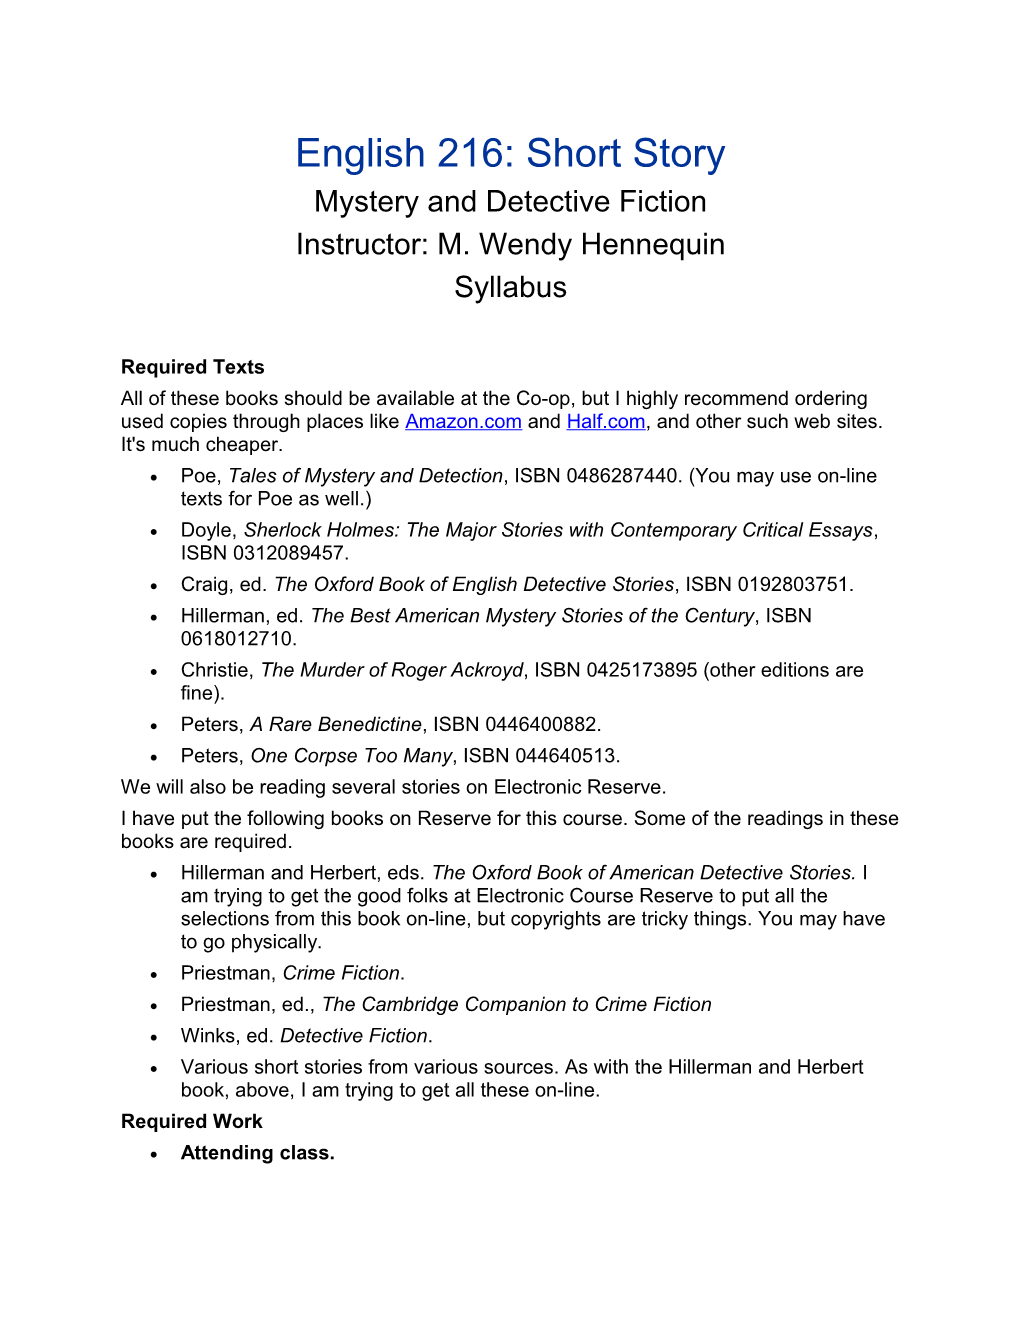 Mystery and Detective Fiction